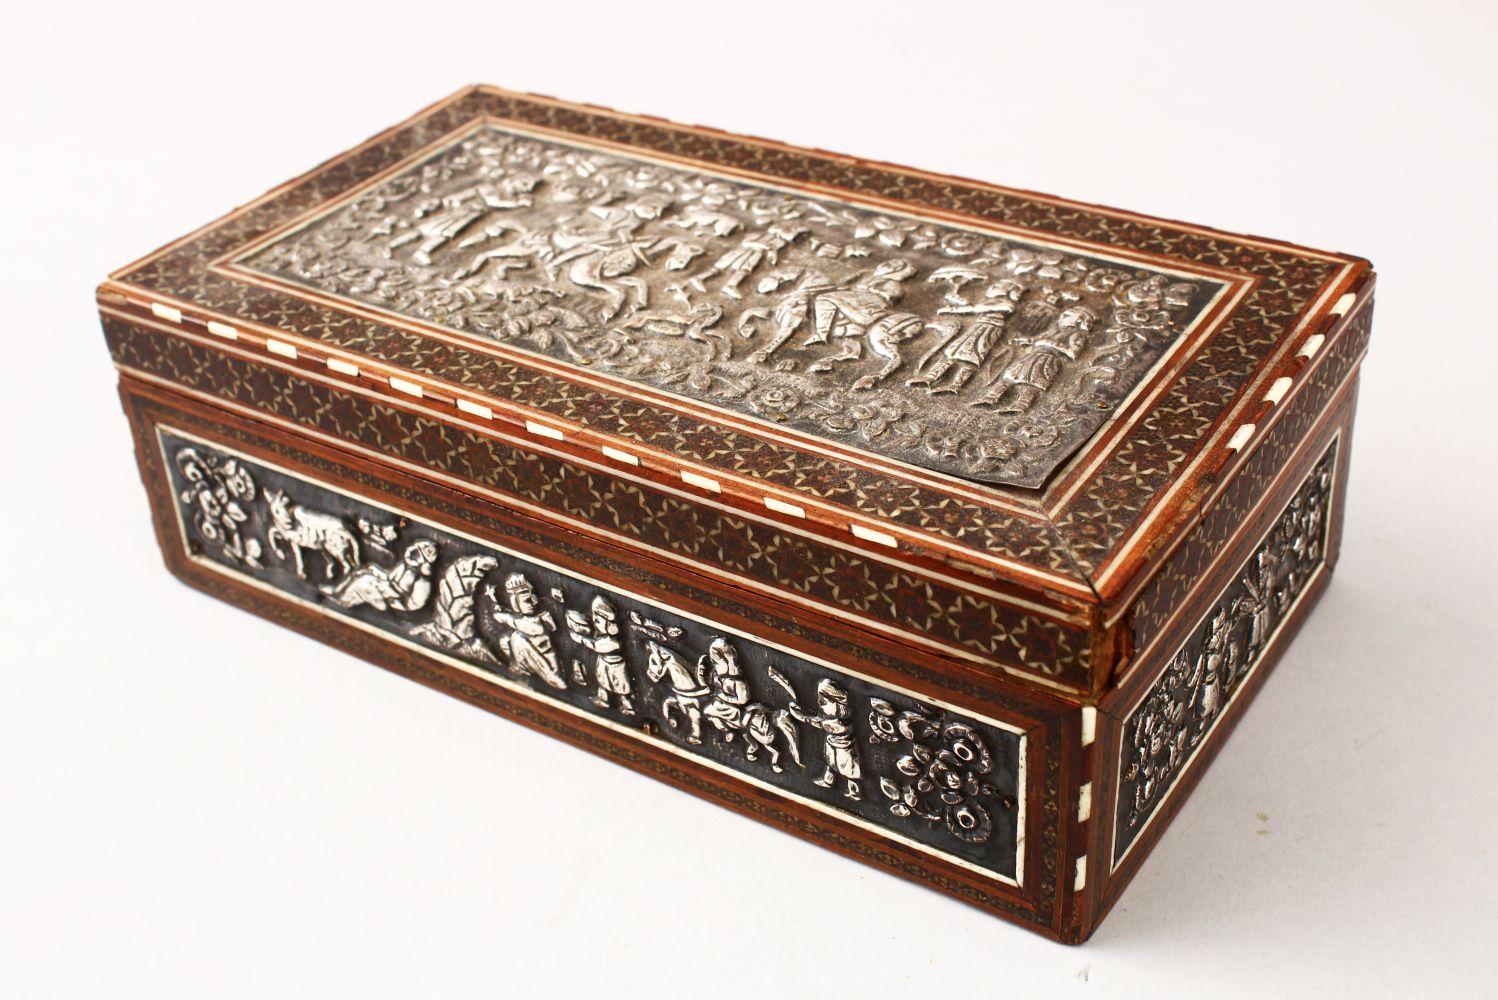 A GOOD IRANIAN SHIRAZ KHATEMI WOODEN & WHITE METAL BOX, the bod with inset white metal embossed